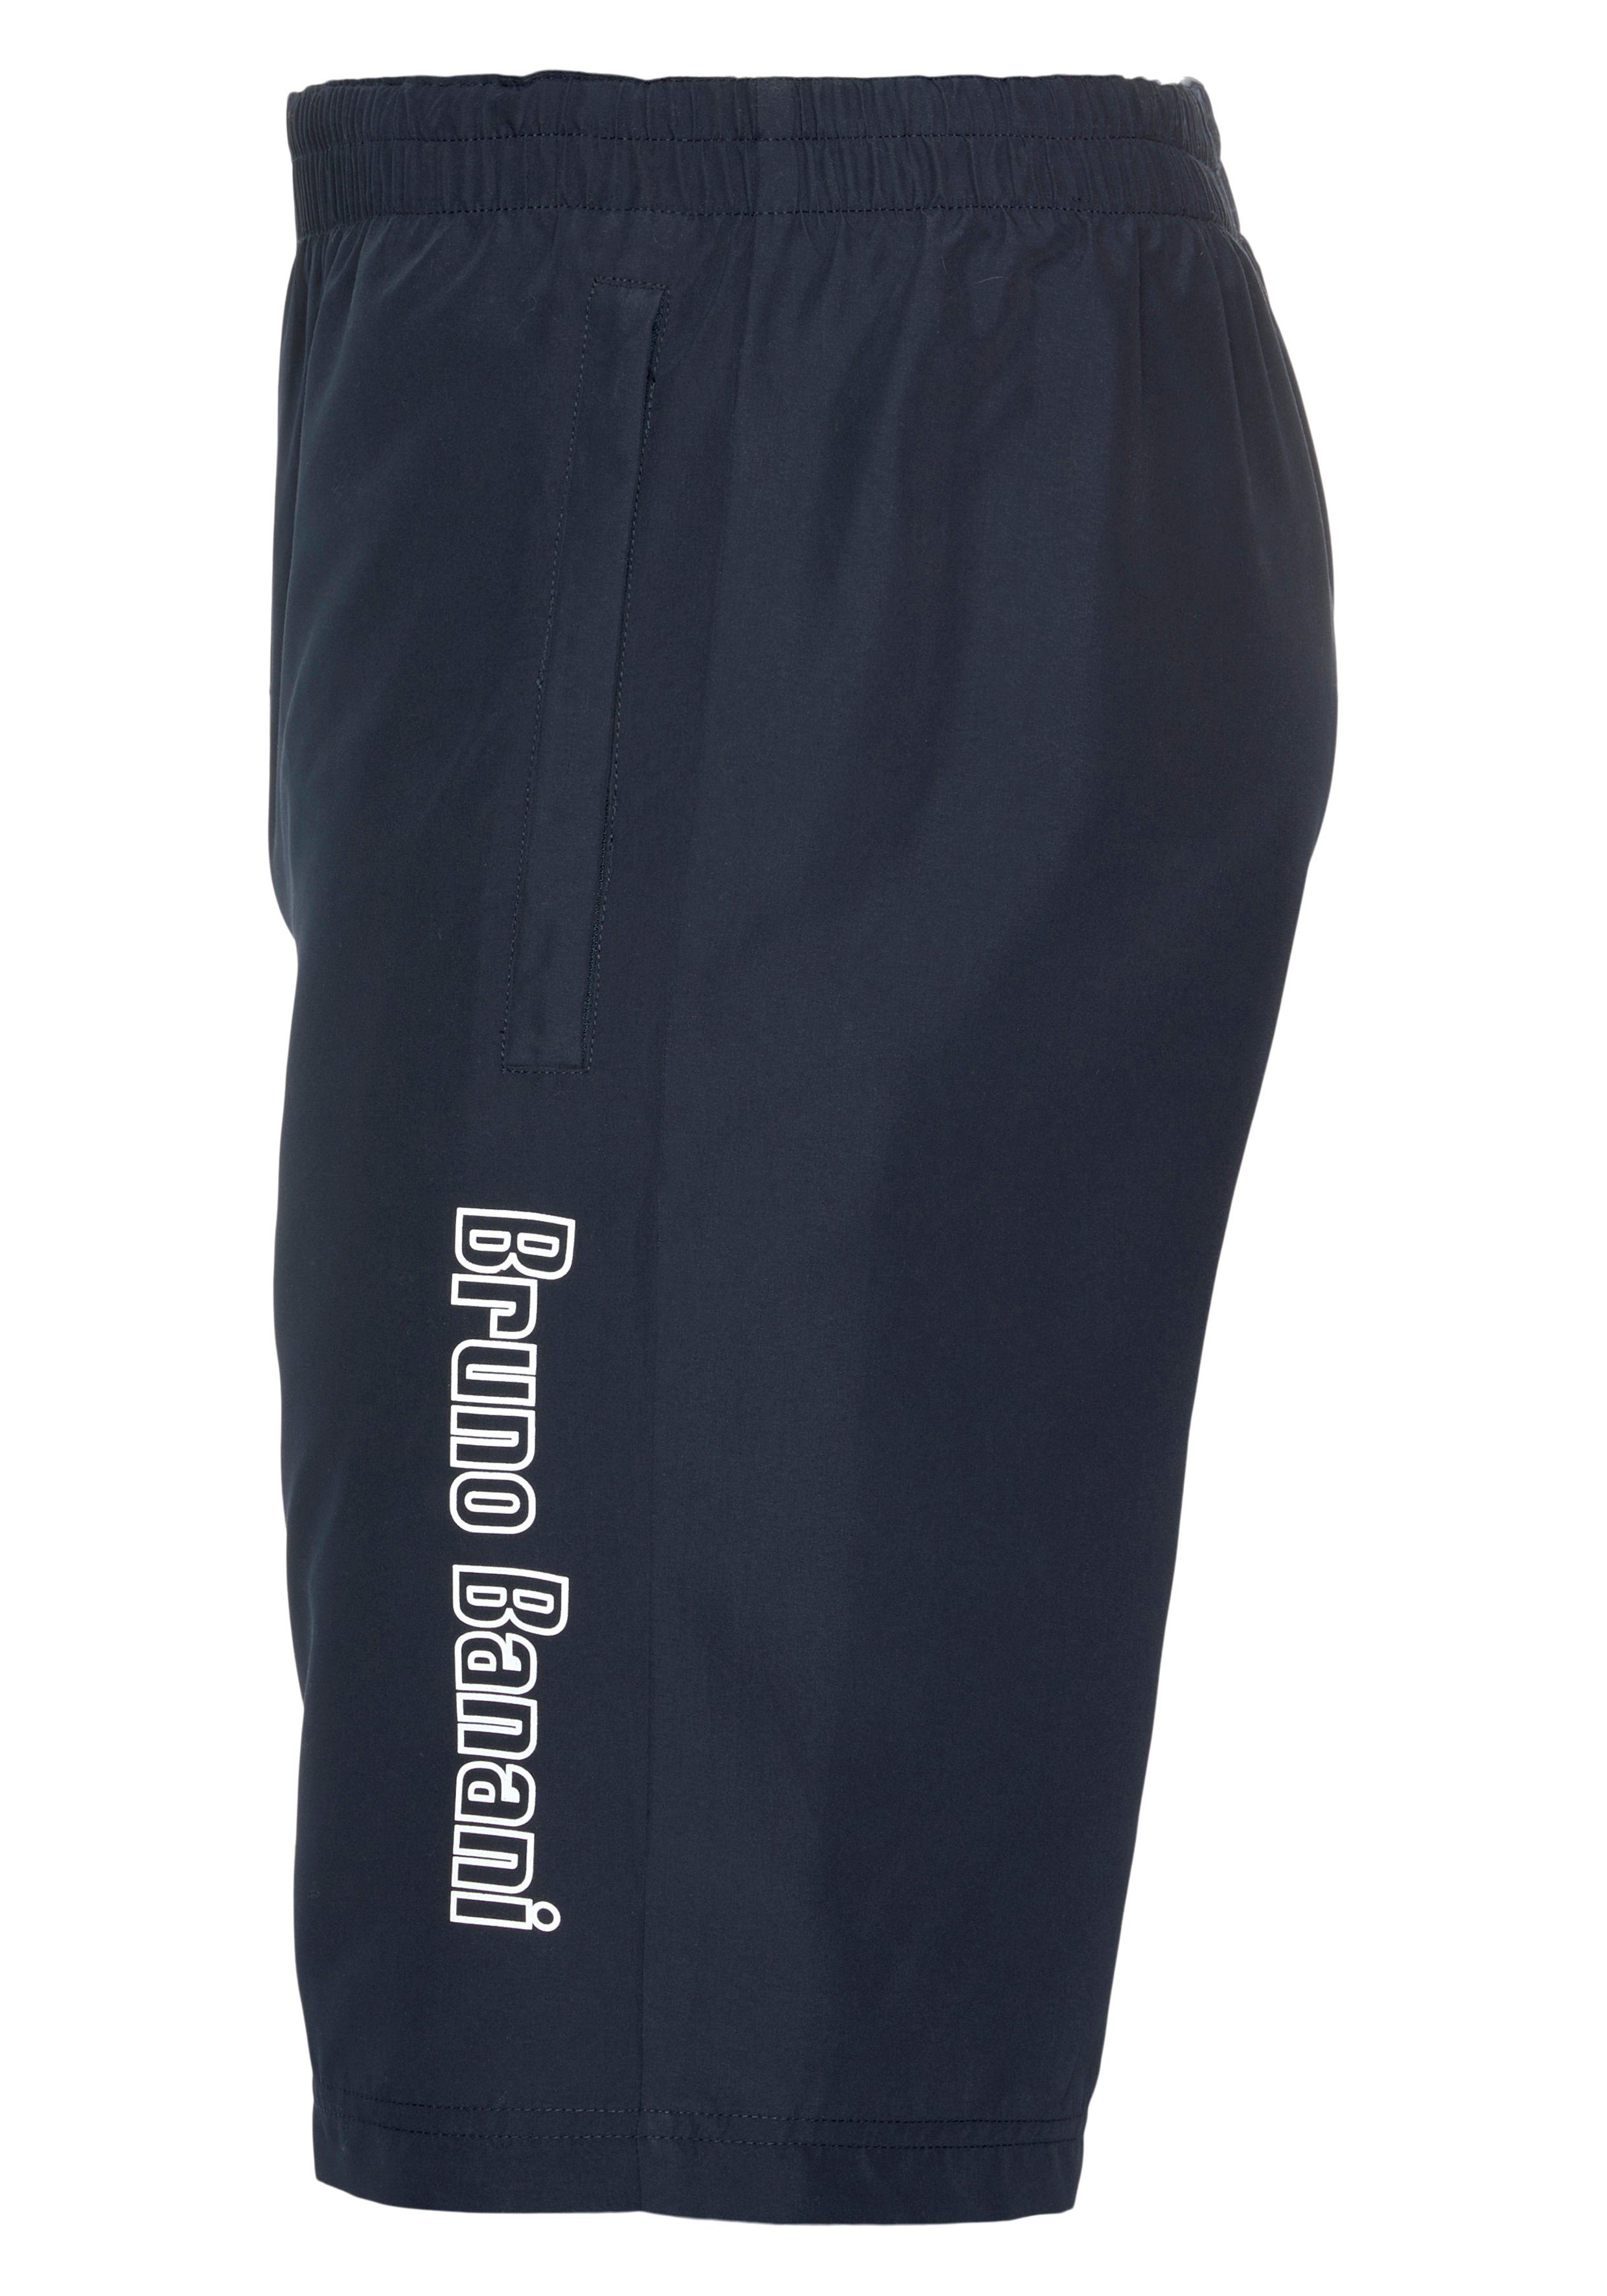 Funktionsshorts recyceltem Material Banani aus Bruno Navy